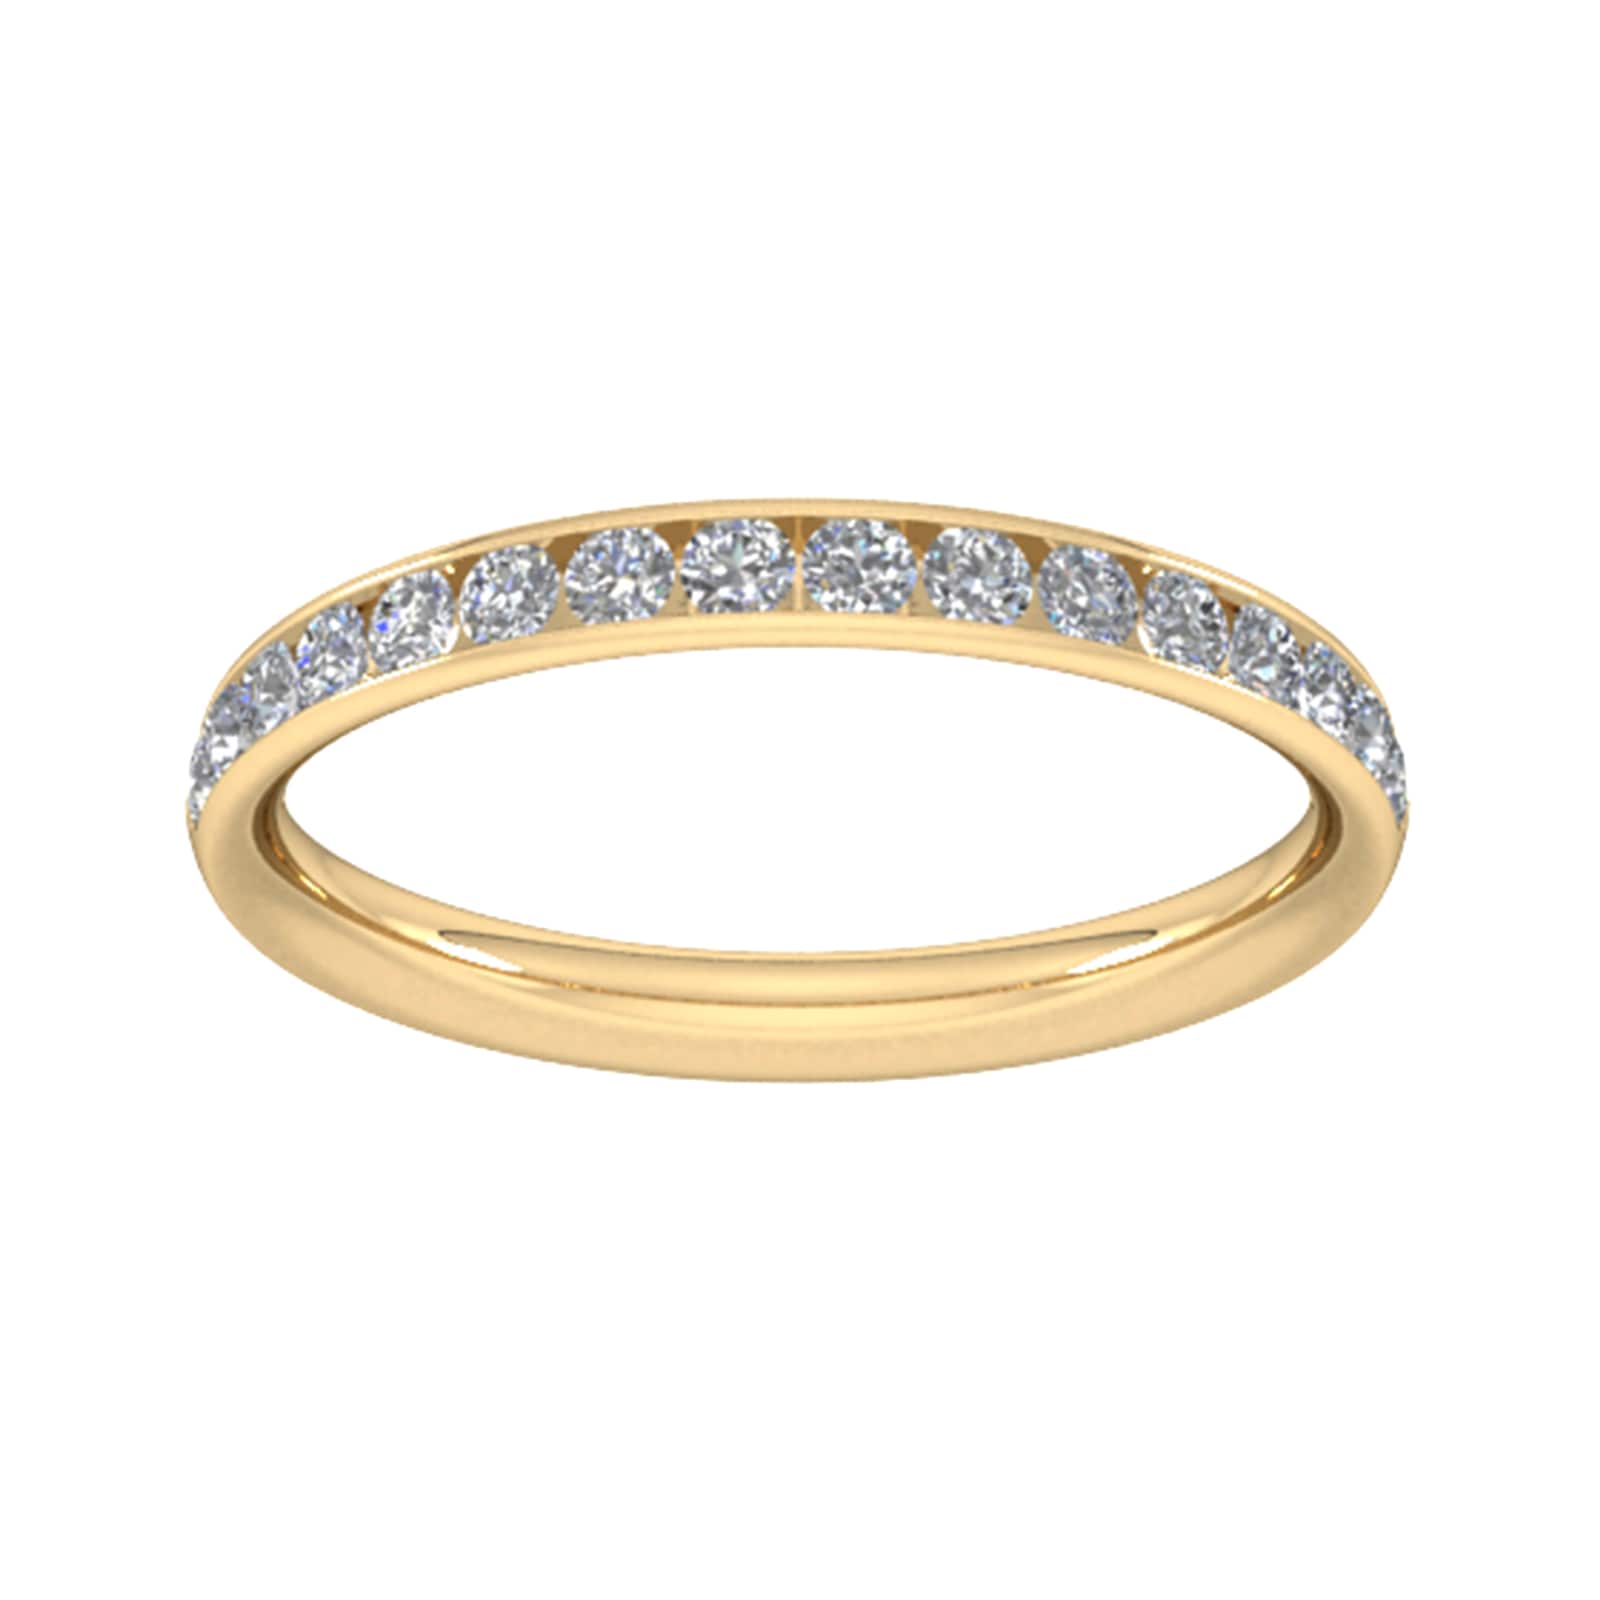 0.44 Carat Total Weight Half Channel Set Brilliant Cut Diamond Wedding Ring In 9 Carat Yellow Gold - Ring Size W